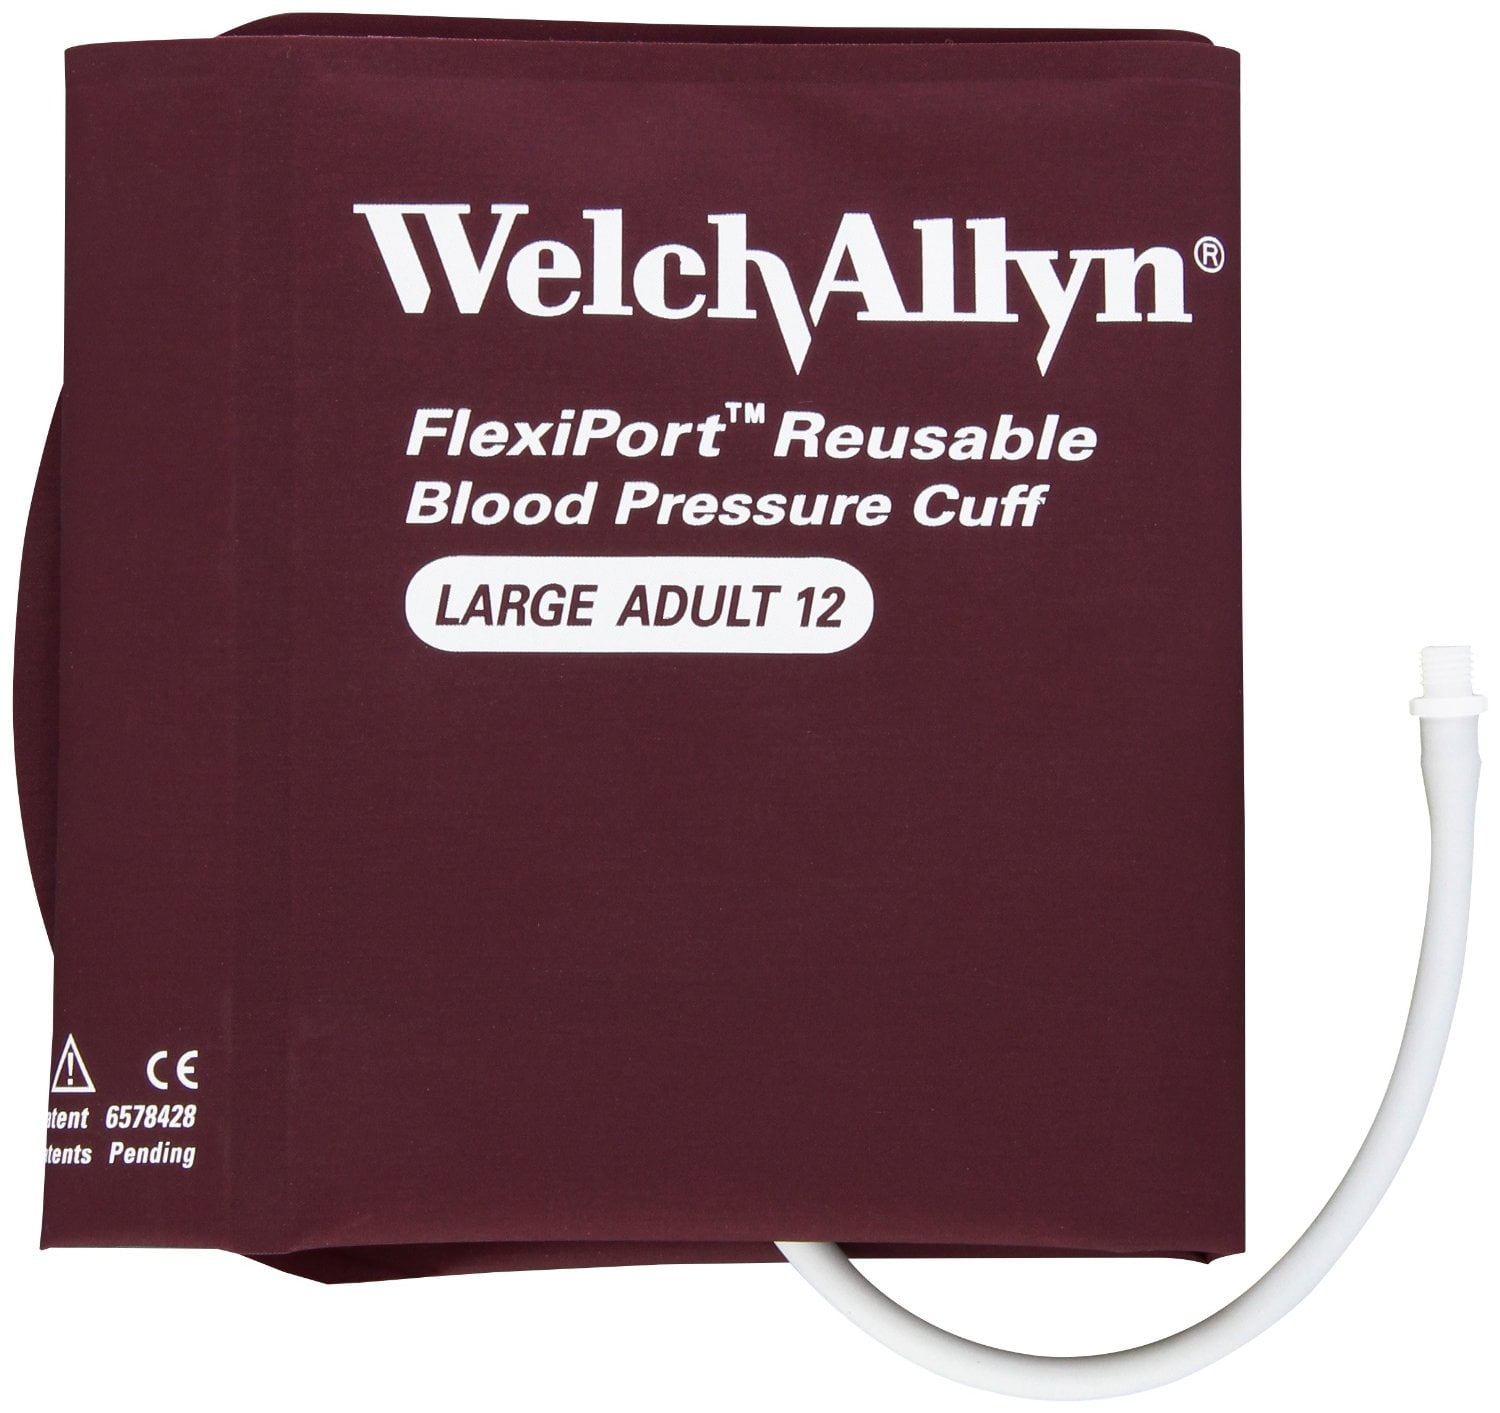 Welch Allyn FlexiPort Reusable Blood Pressure Cuffs Size 12 Large Adult